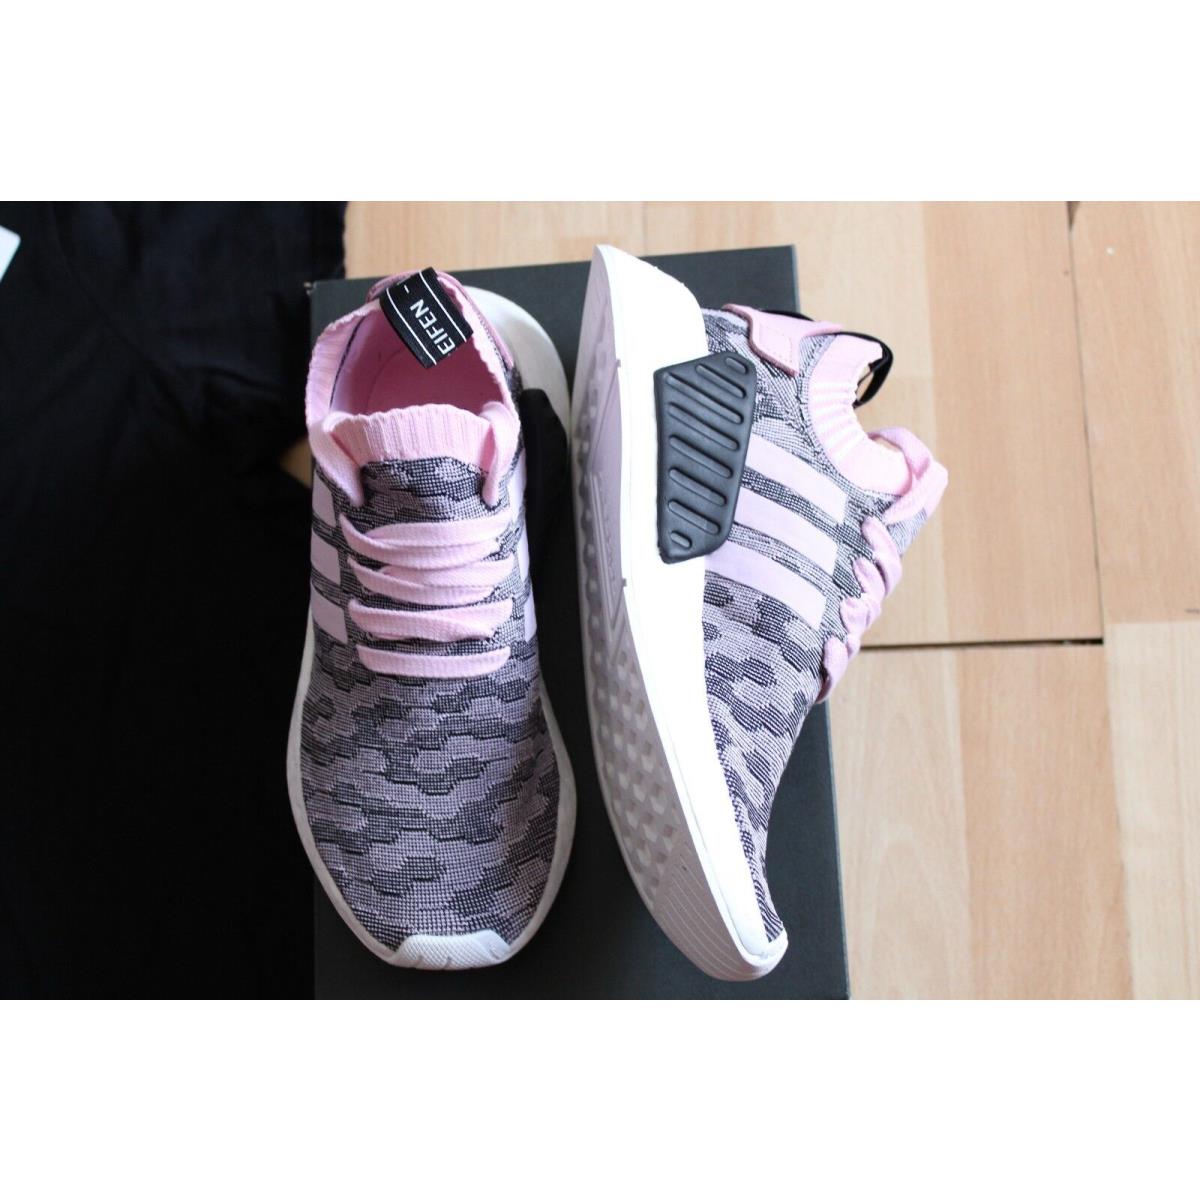 Adidas shoes NMD - PINK 0